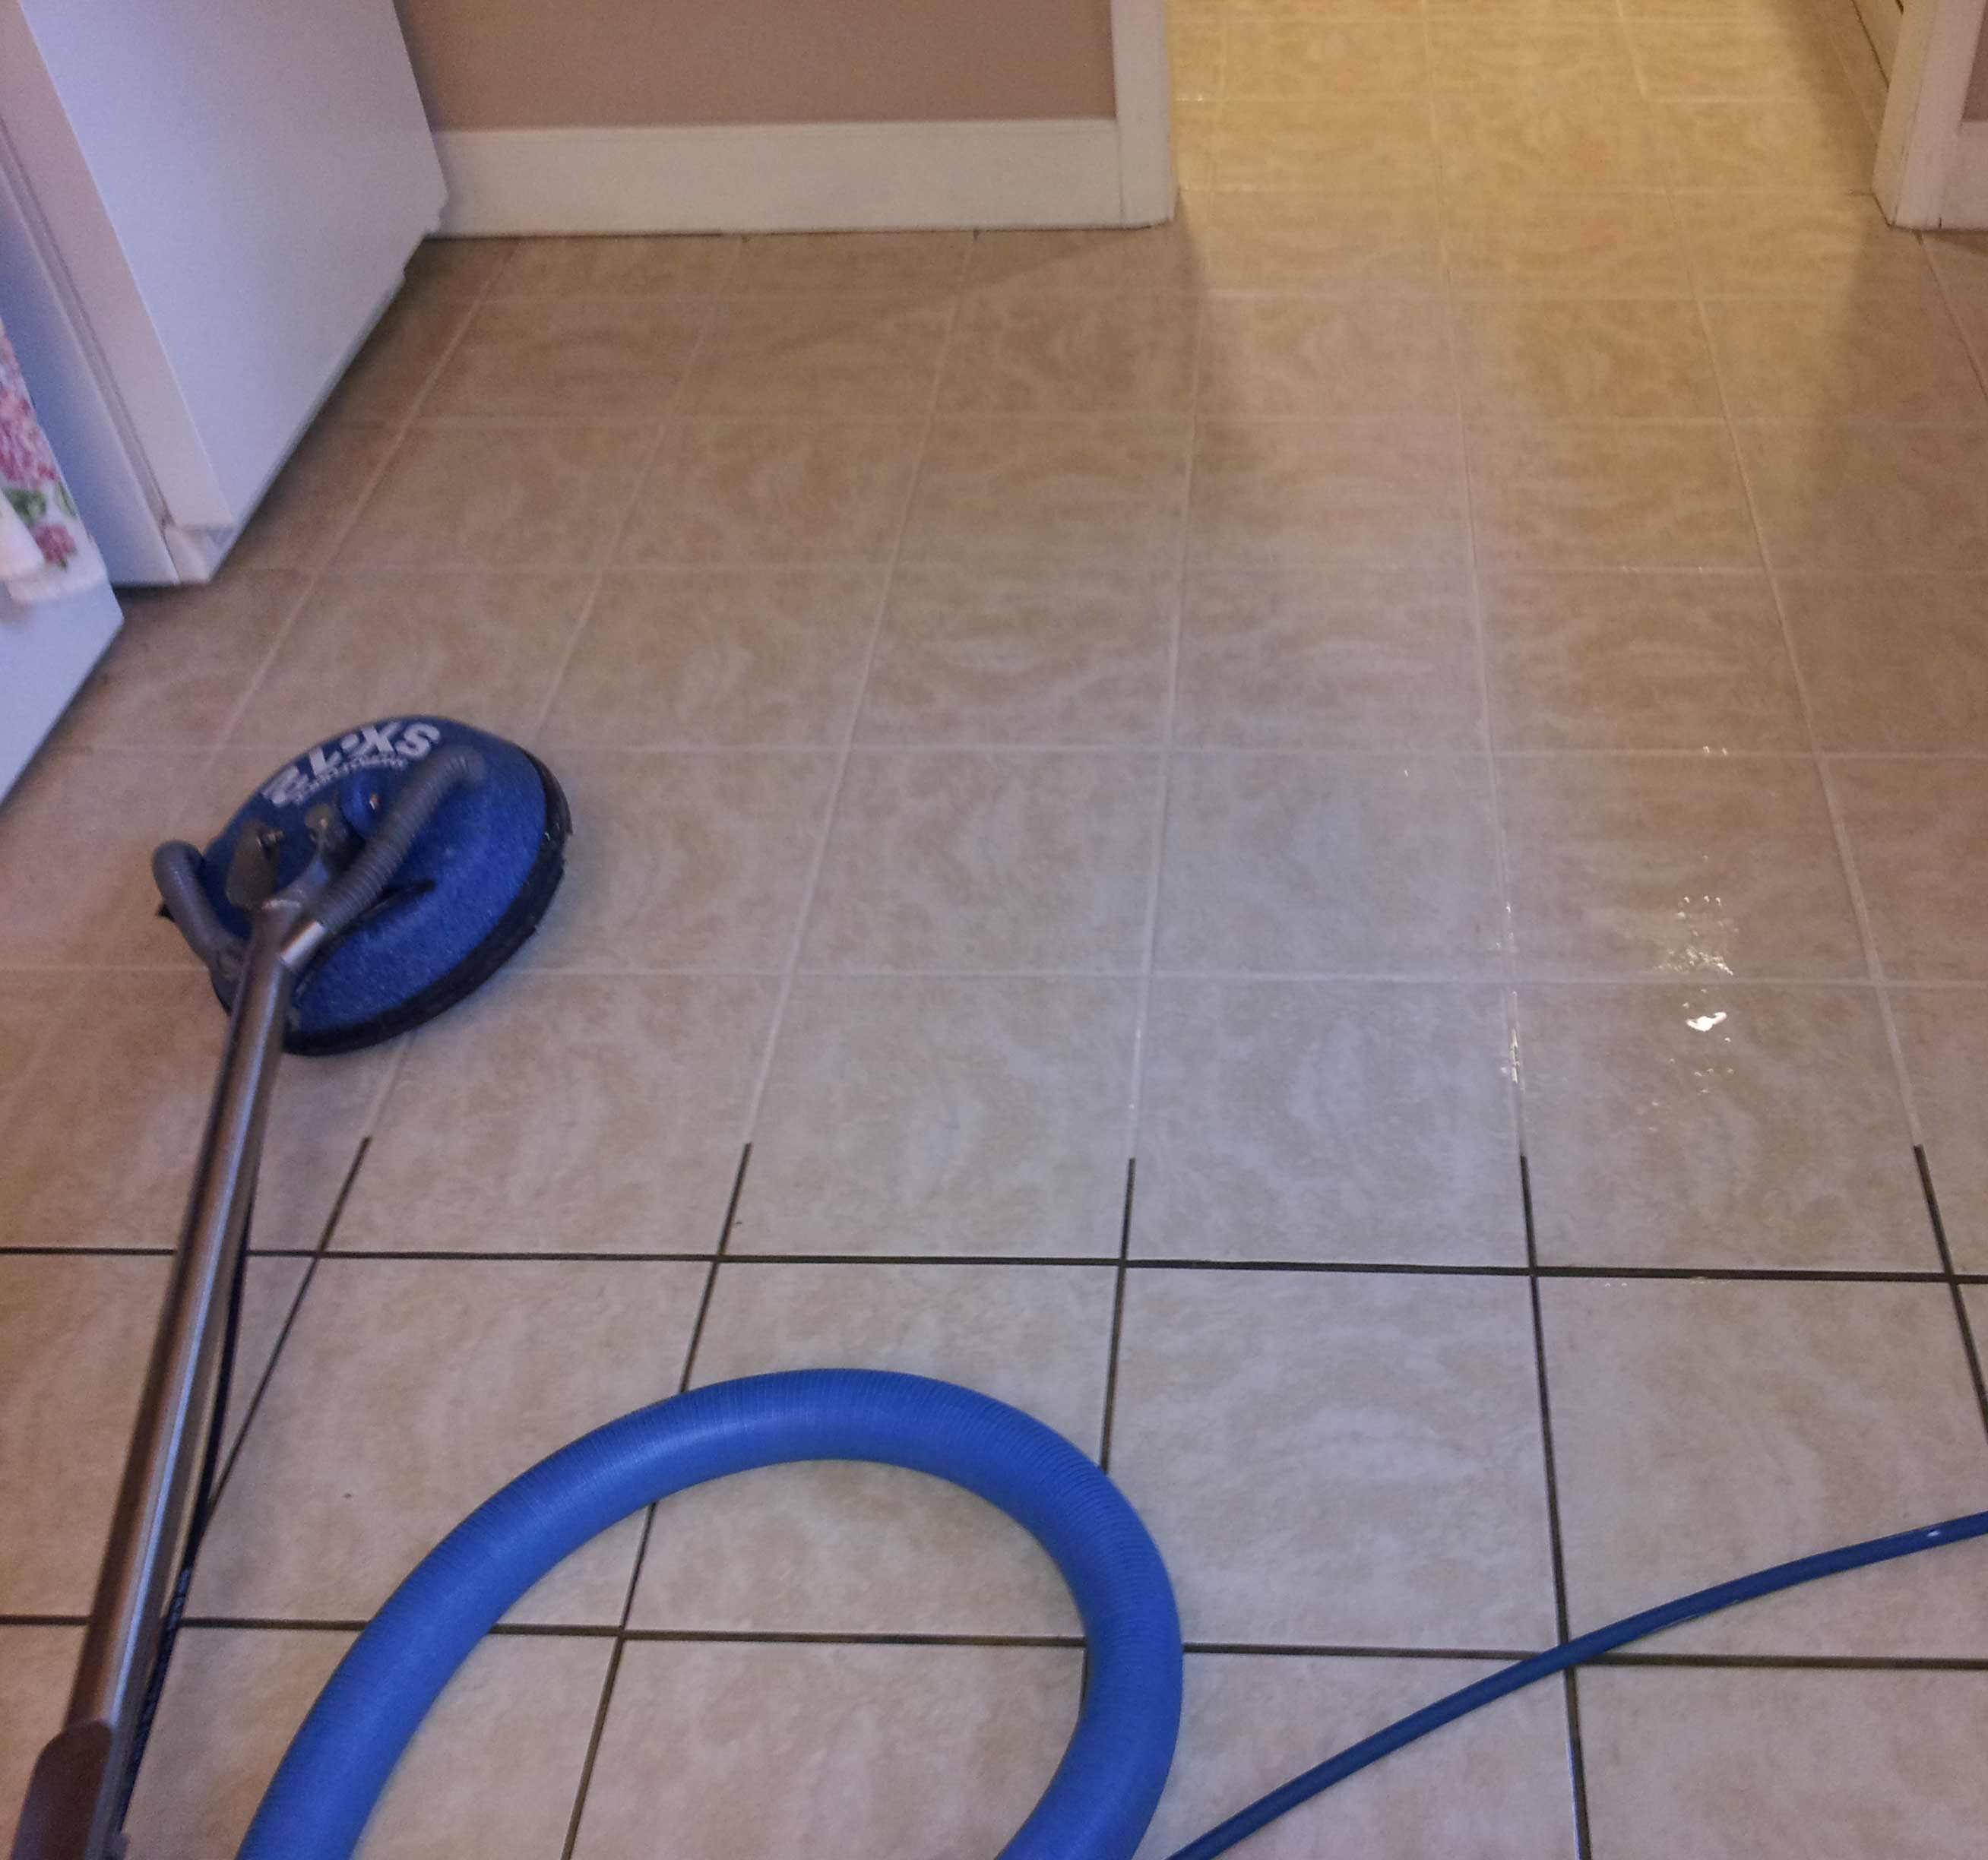 tile-and-grout-before-and-after